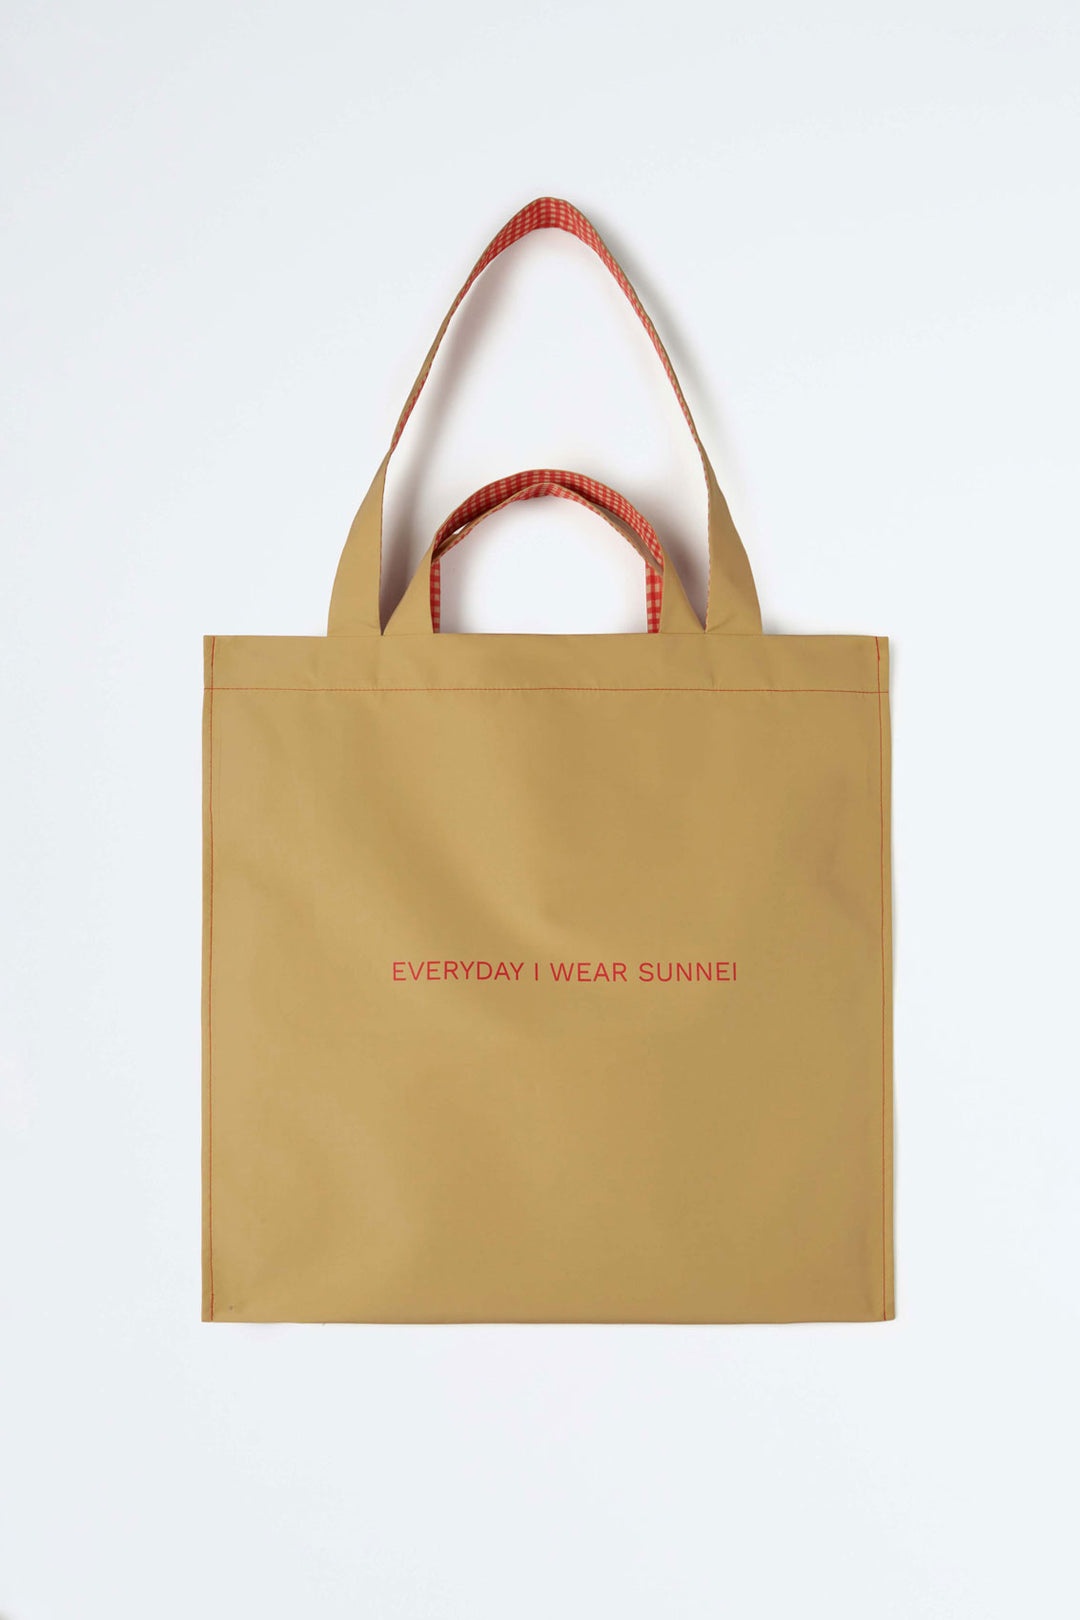 EVERYDAY I WEAR SUNNEI YELLOW TOTE BAG - 1